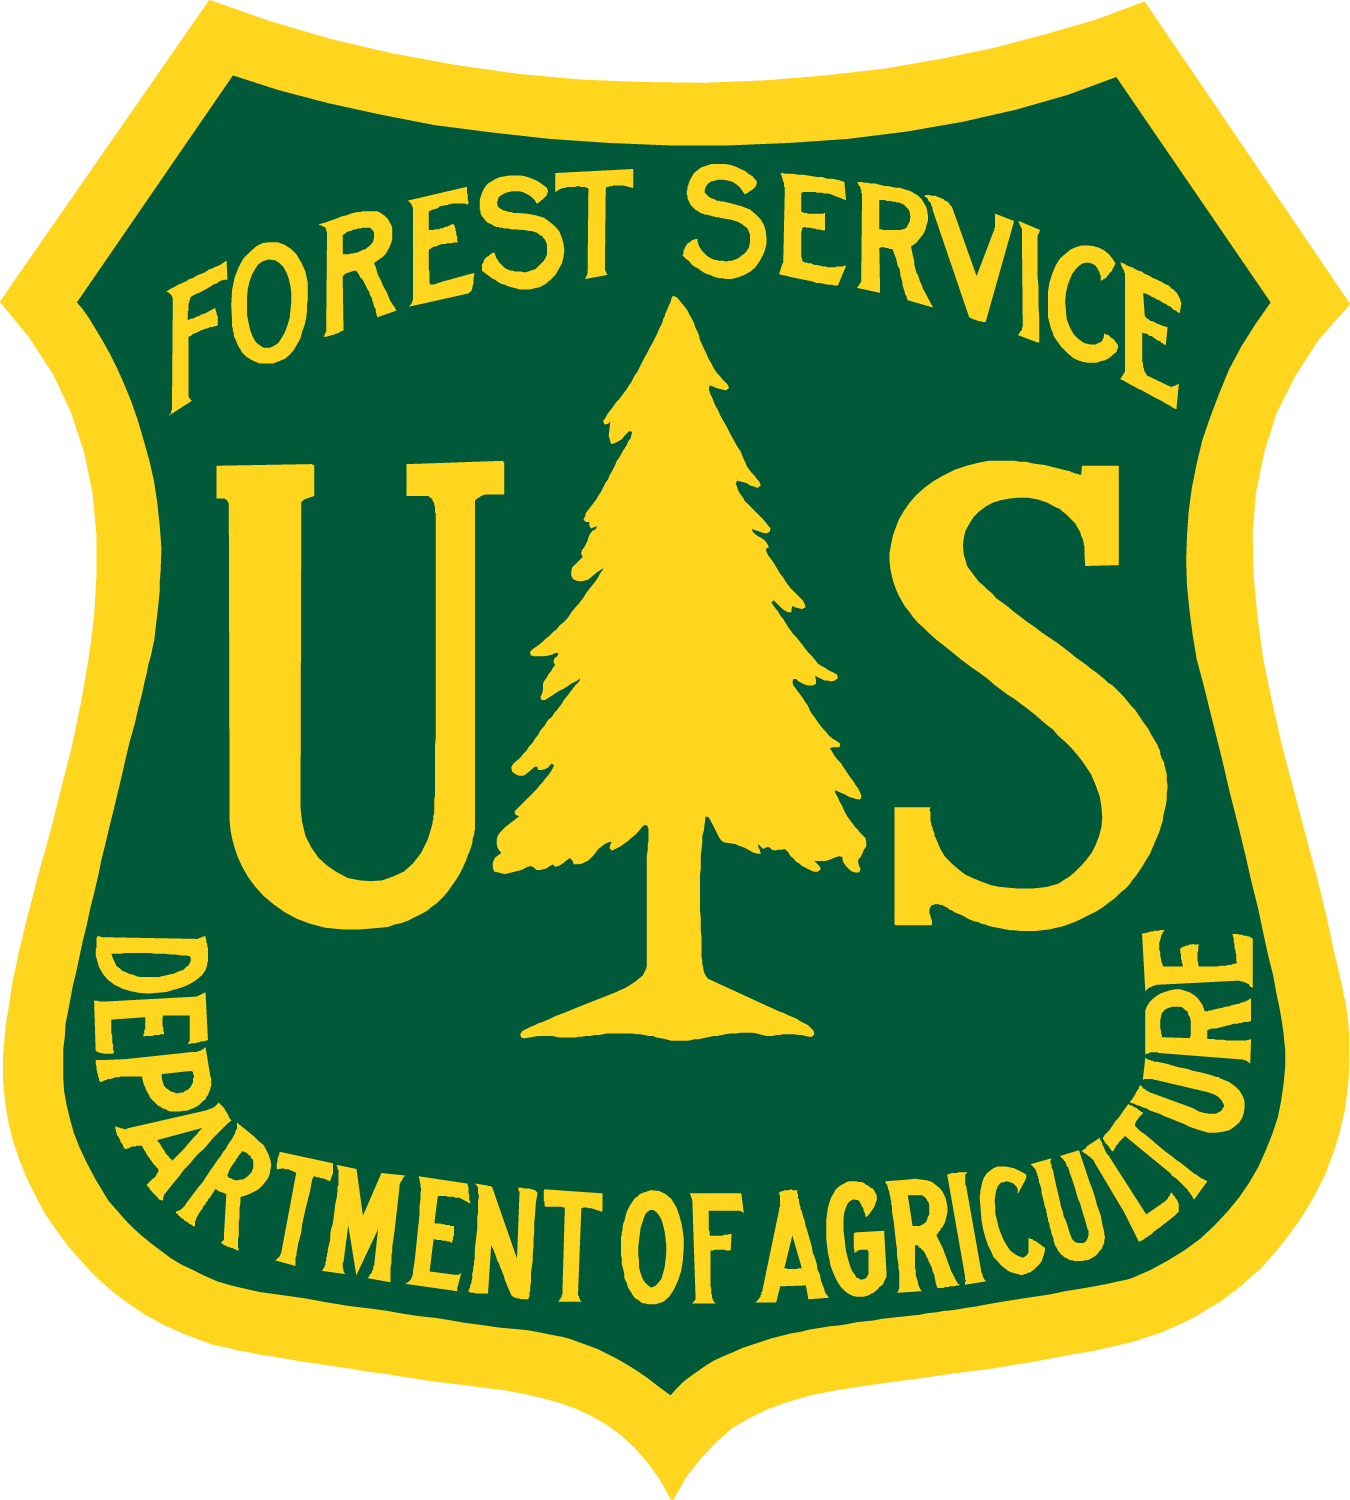 U.S. Department of Agriculture Forest Service seeks a Research Landscape Ecologist